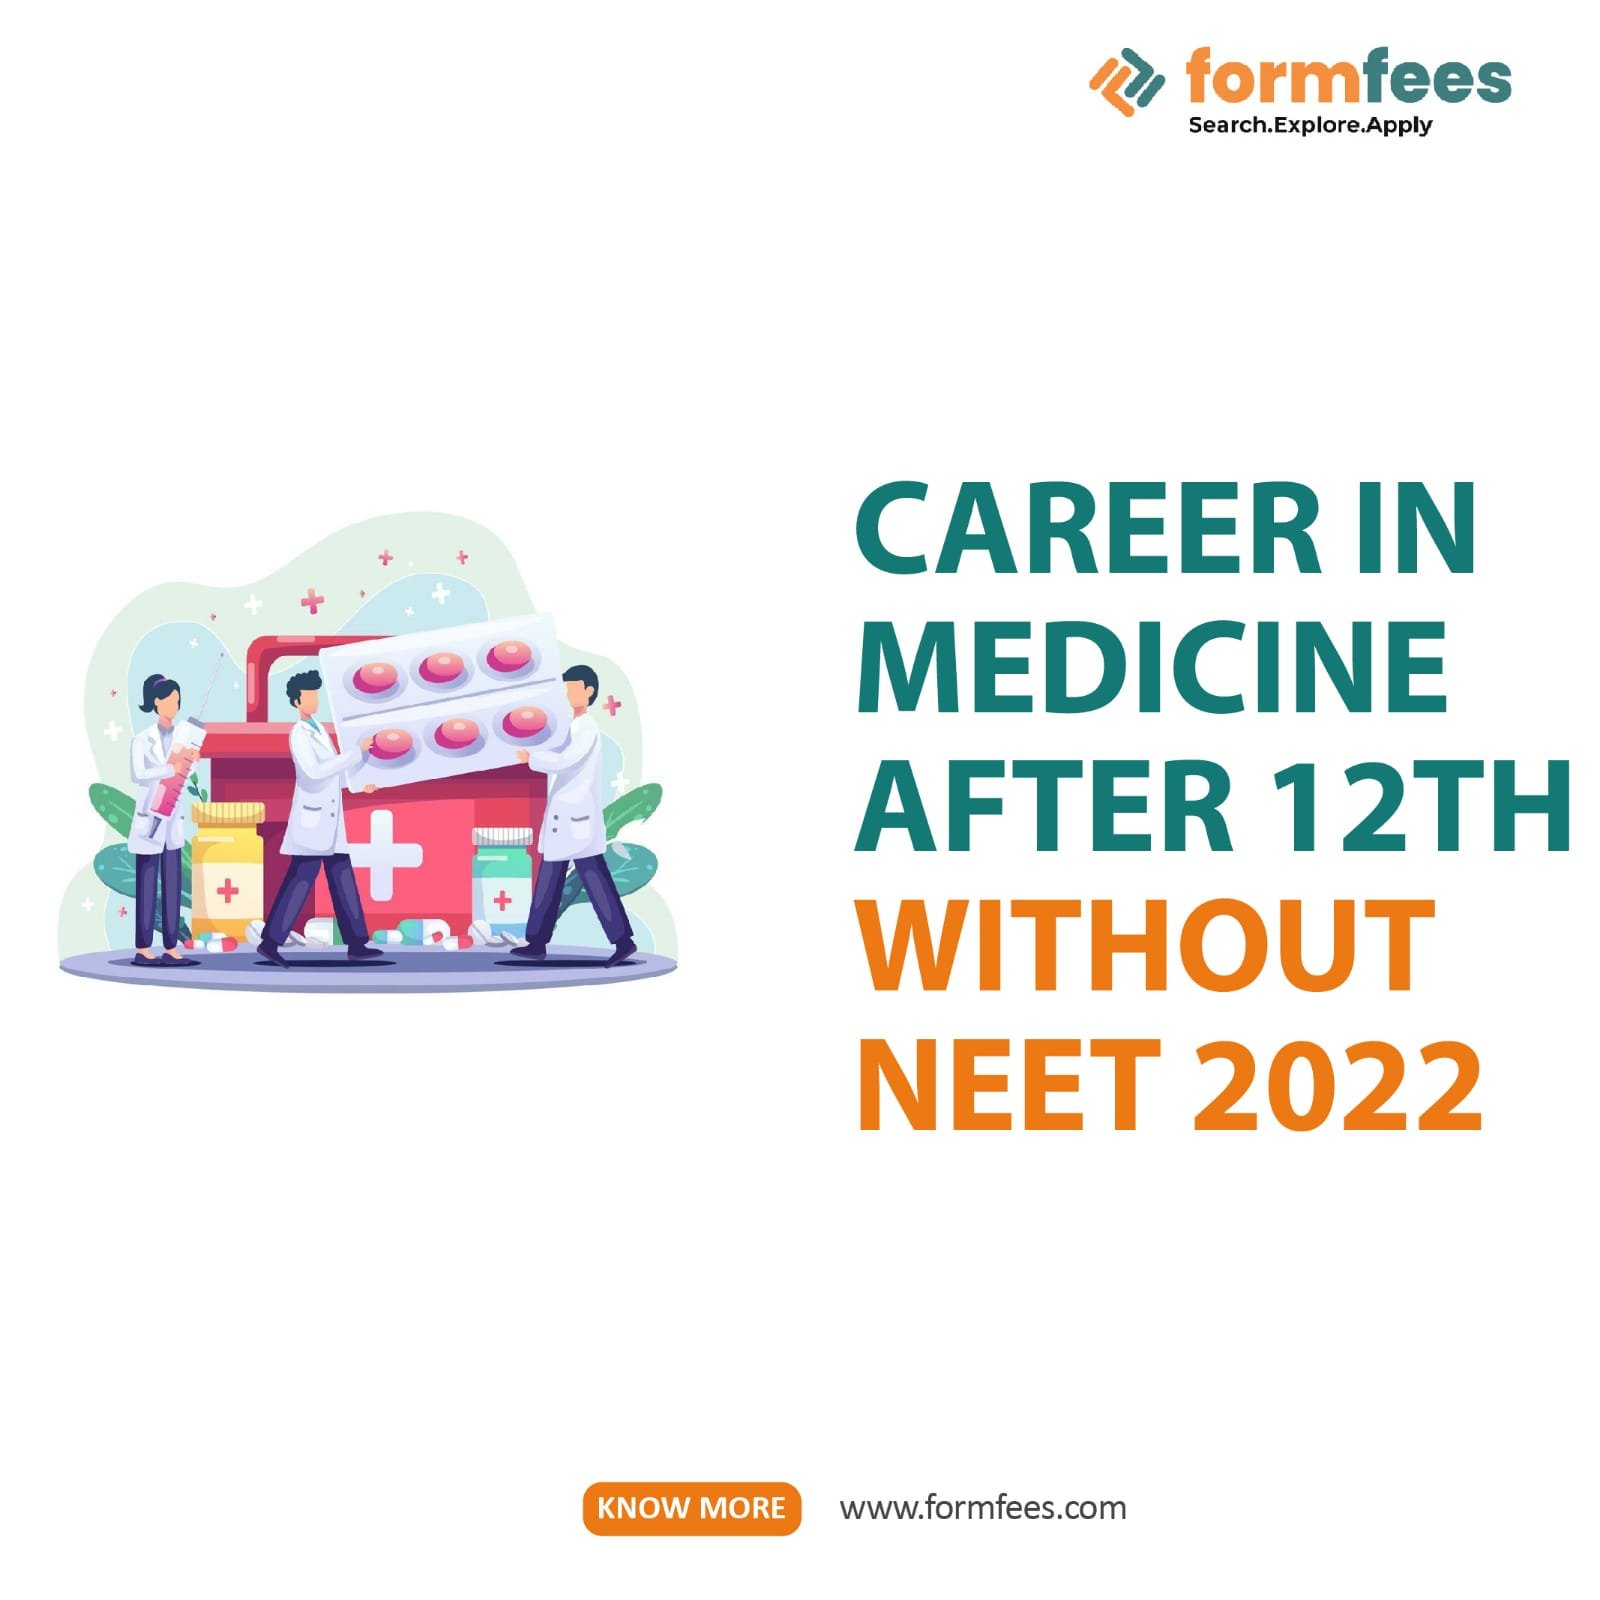 Career in Medicine After 12th without NEET 2022